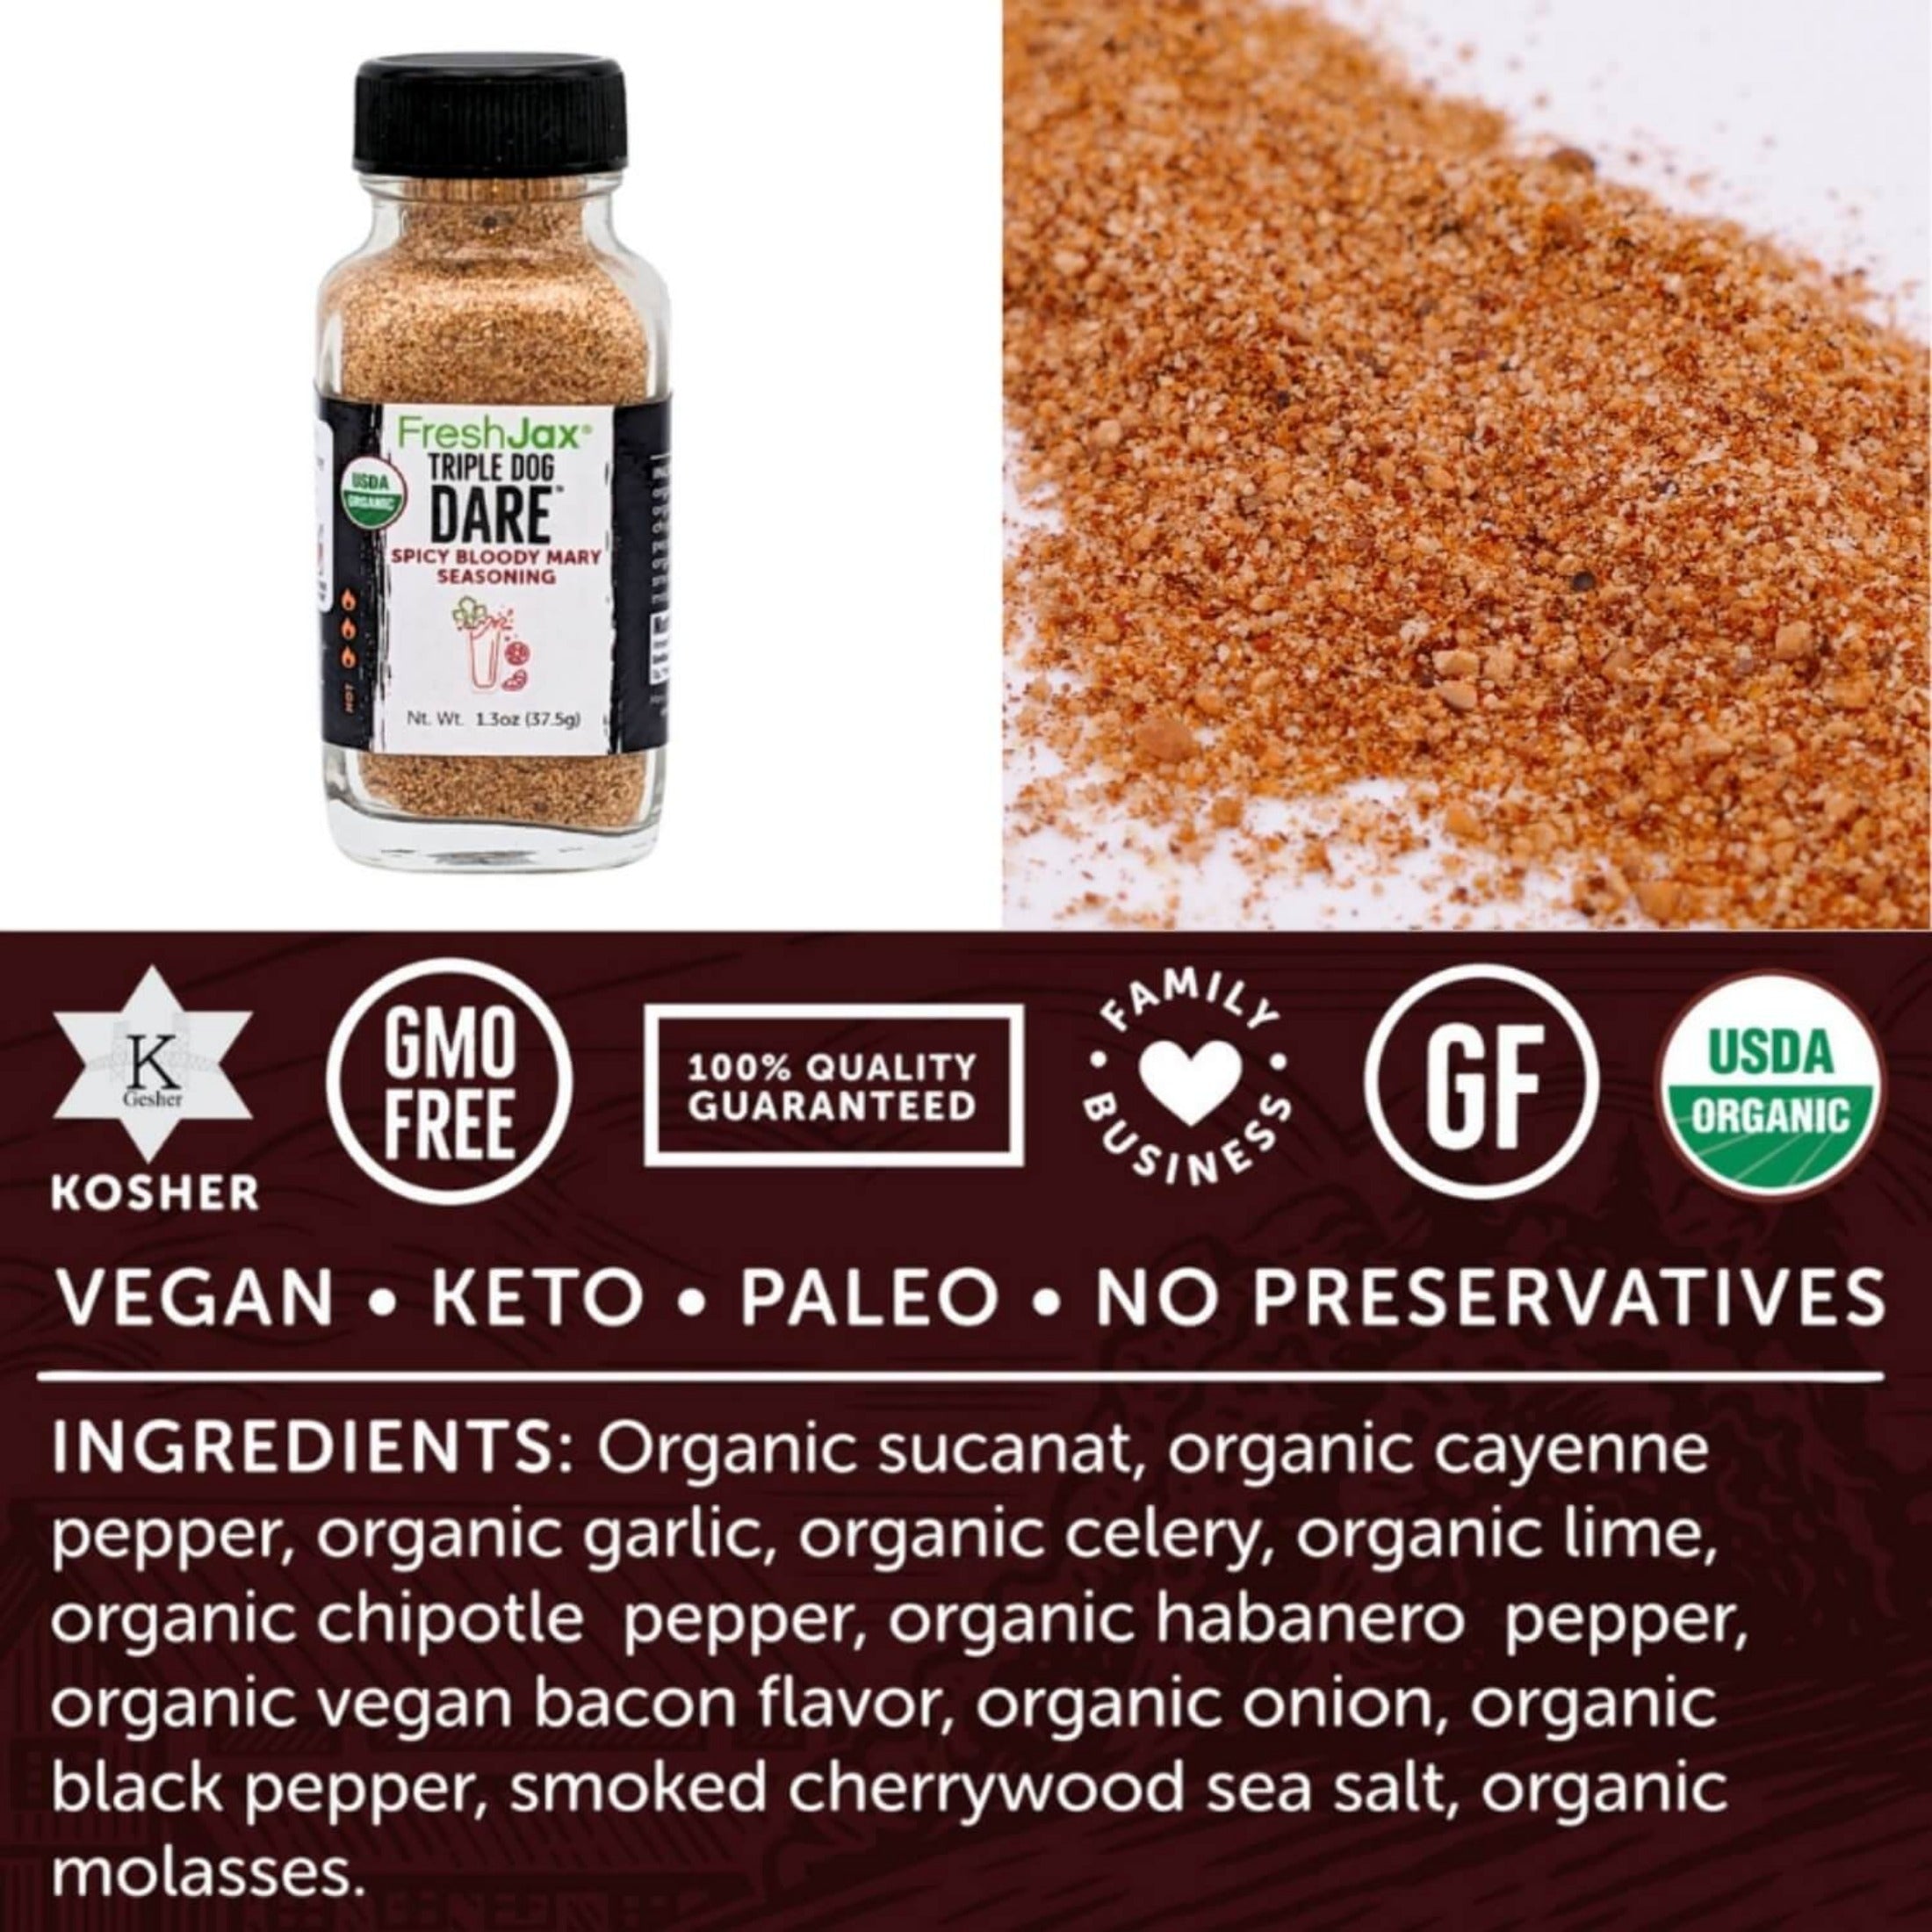 FreshJax Organic Spices Triple Dog Dare Bloody Mary Seasoning Ingredients and Nutritional Information